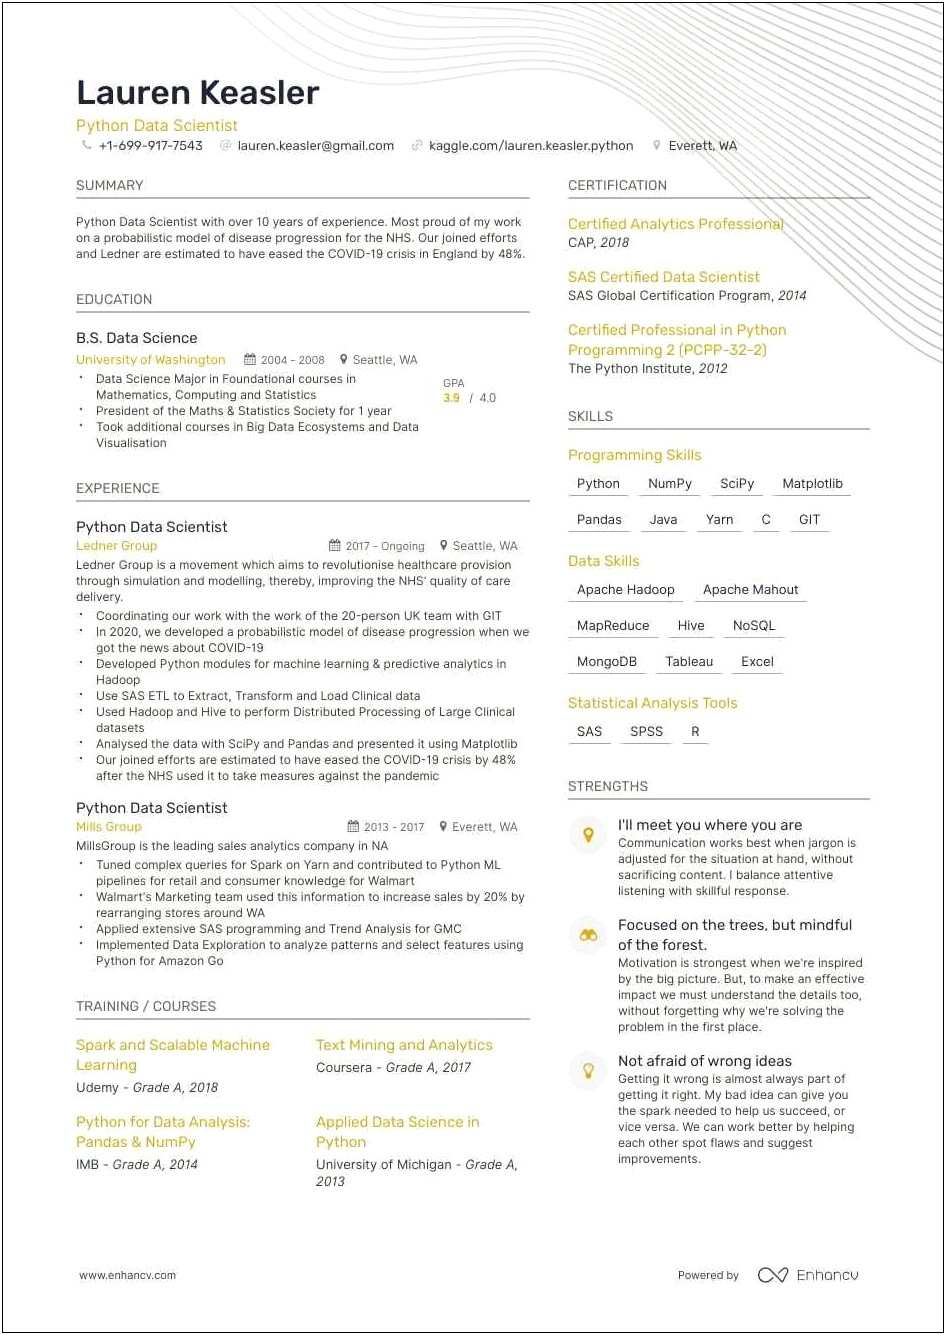 Resume Sample With Capstone Project